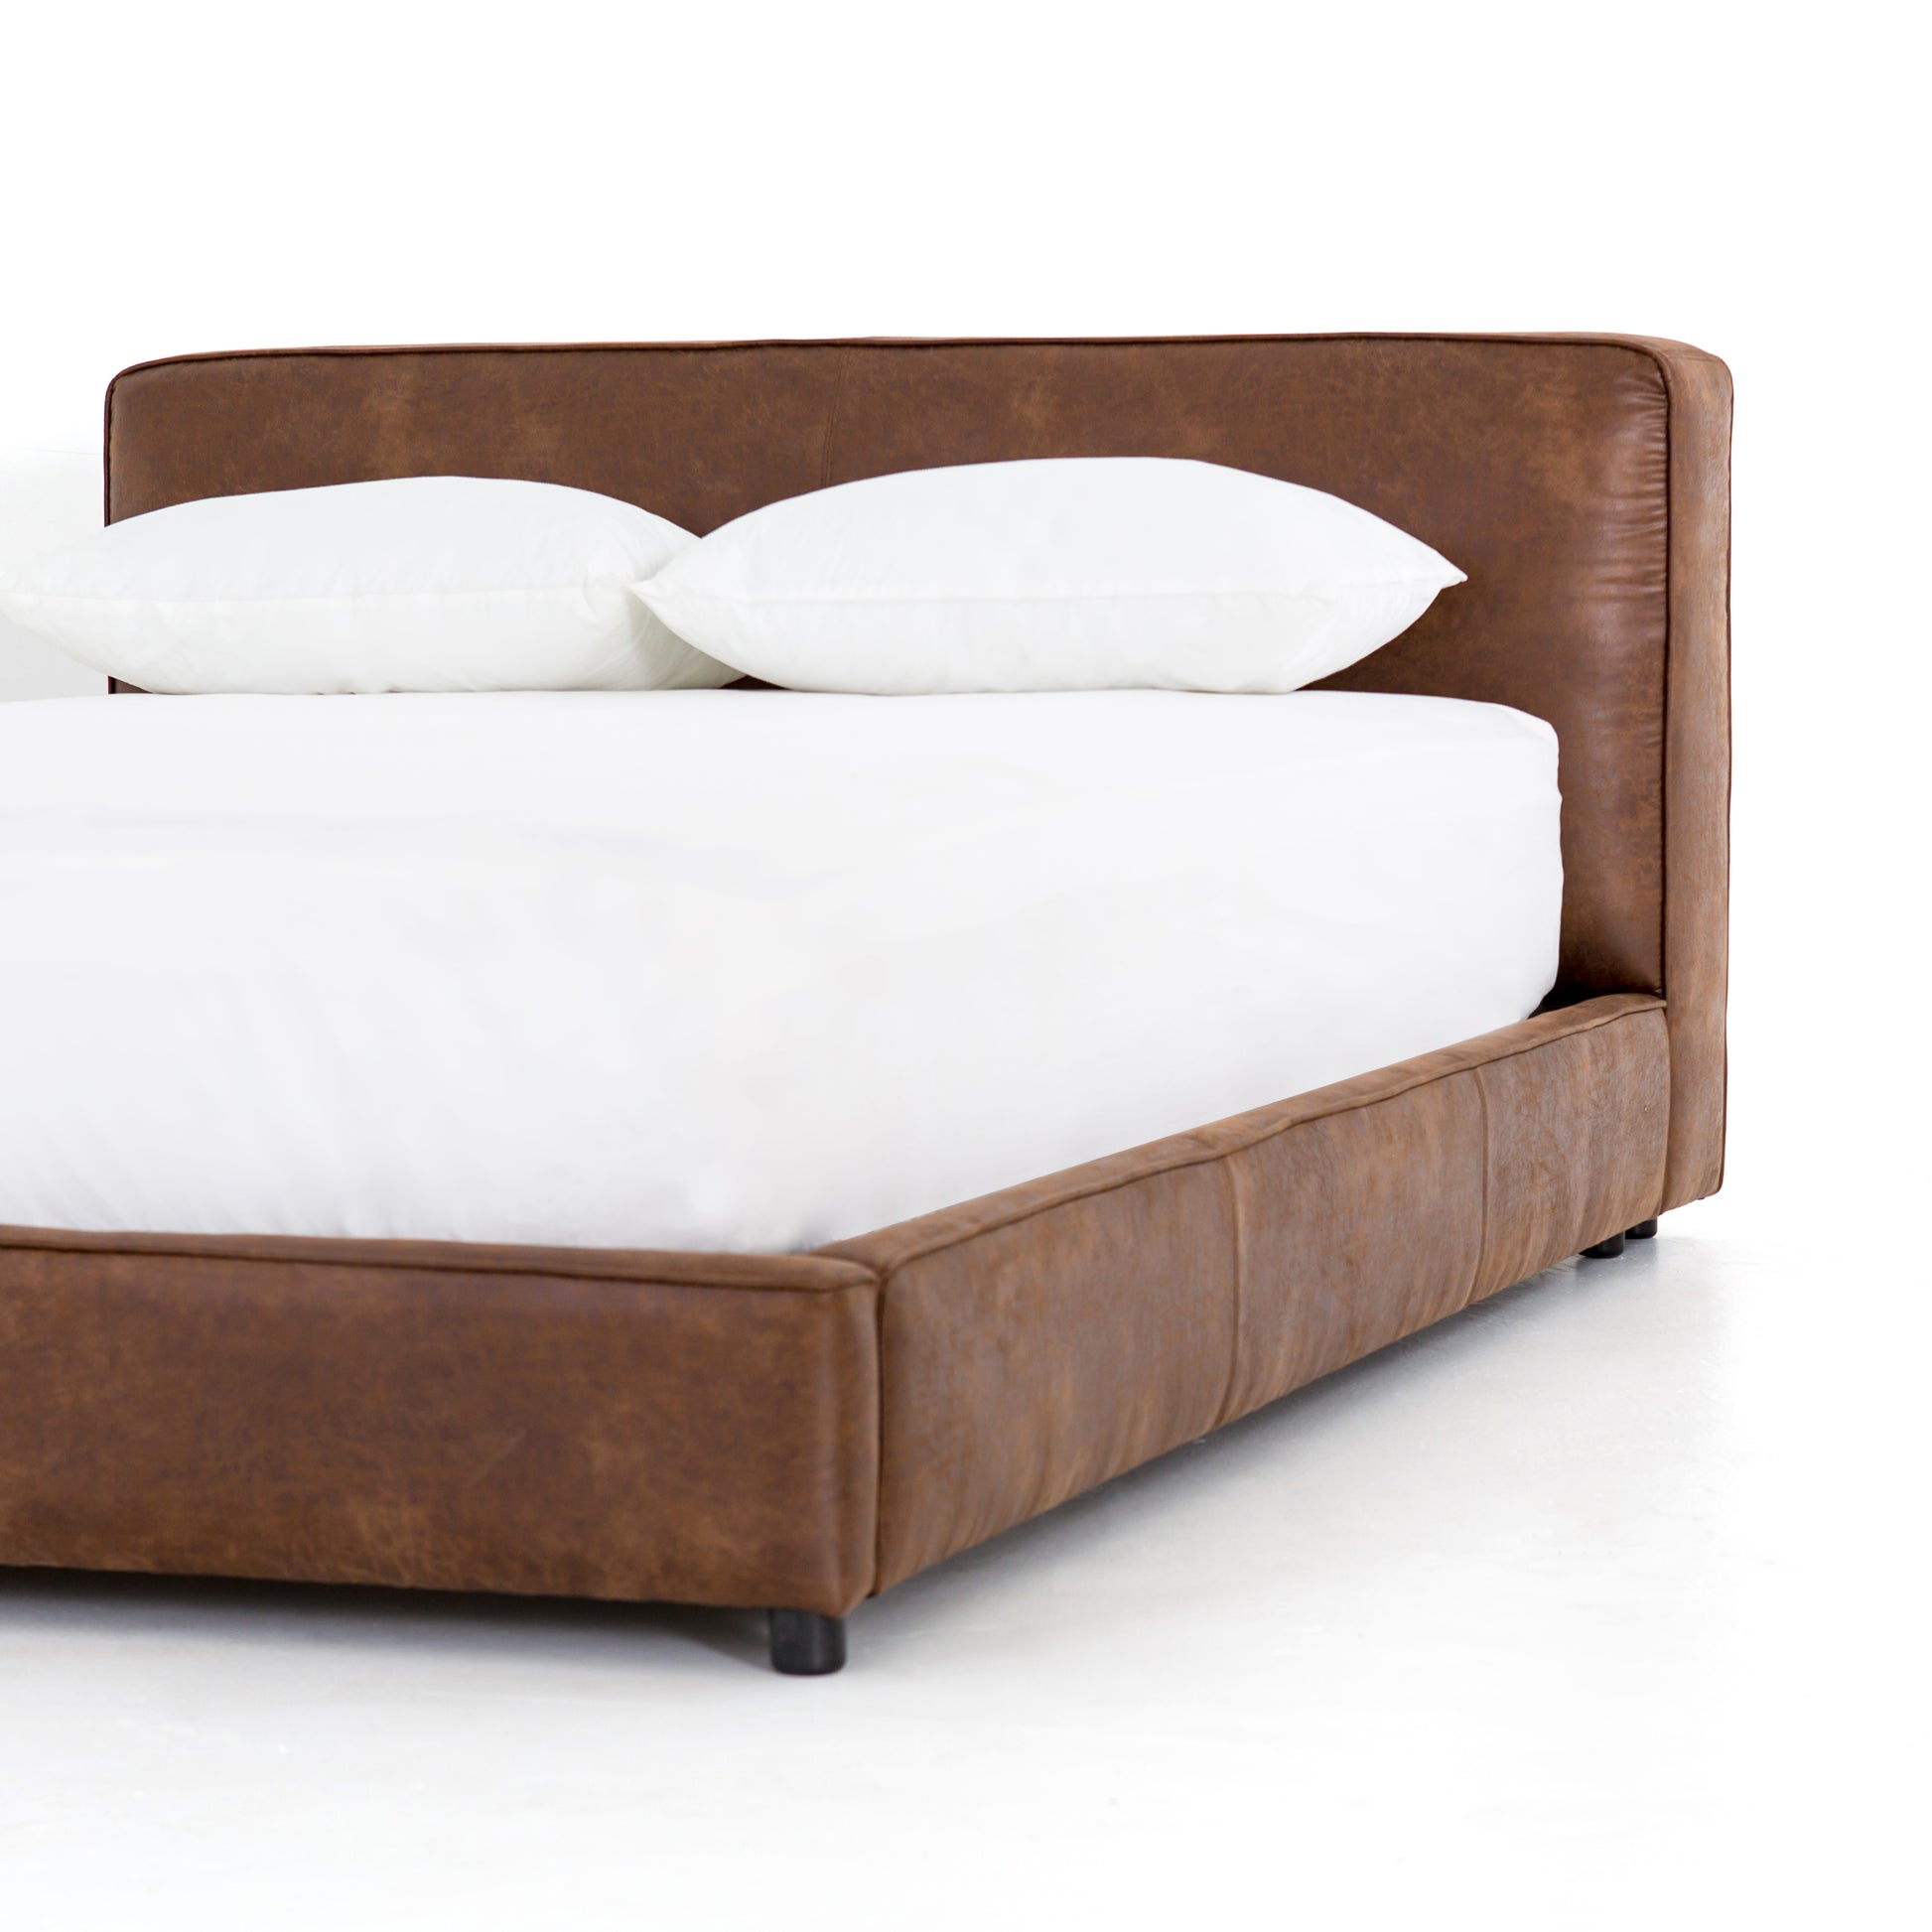 arteriors aidan bed vintage tobacco leather angle detail